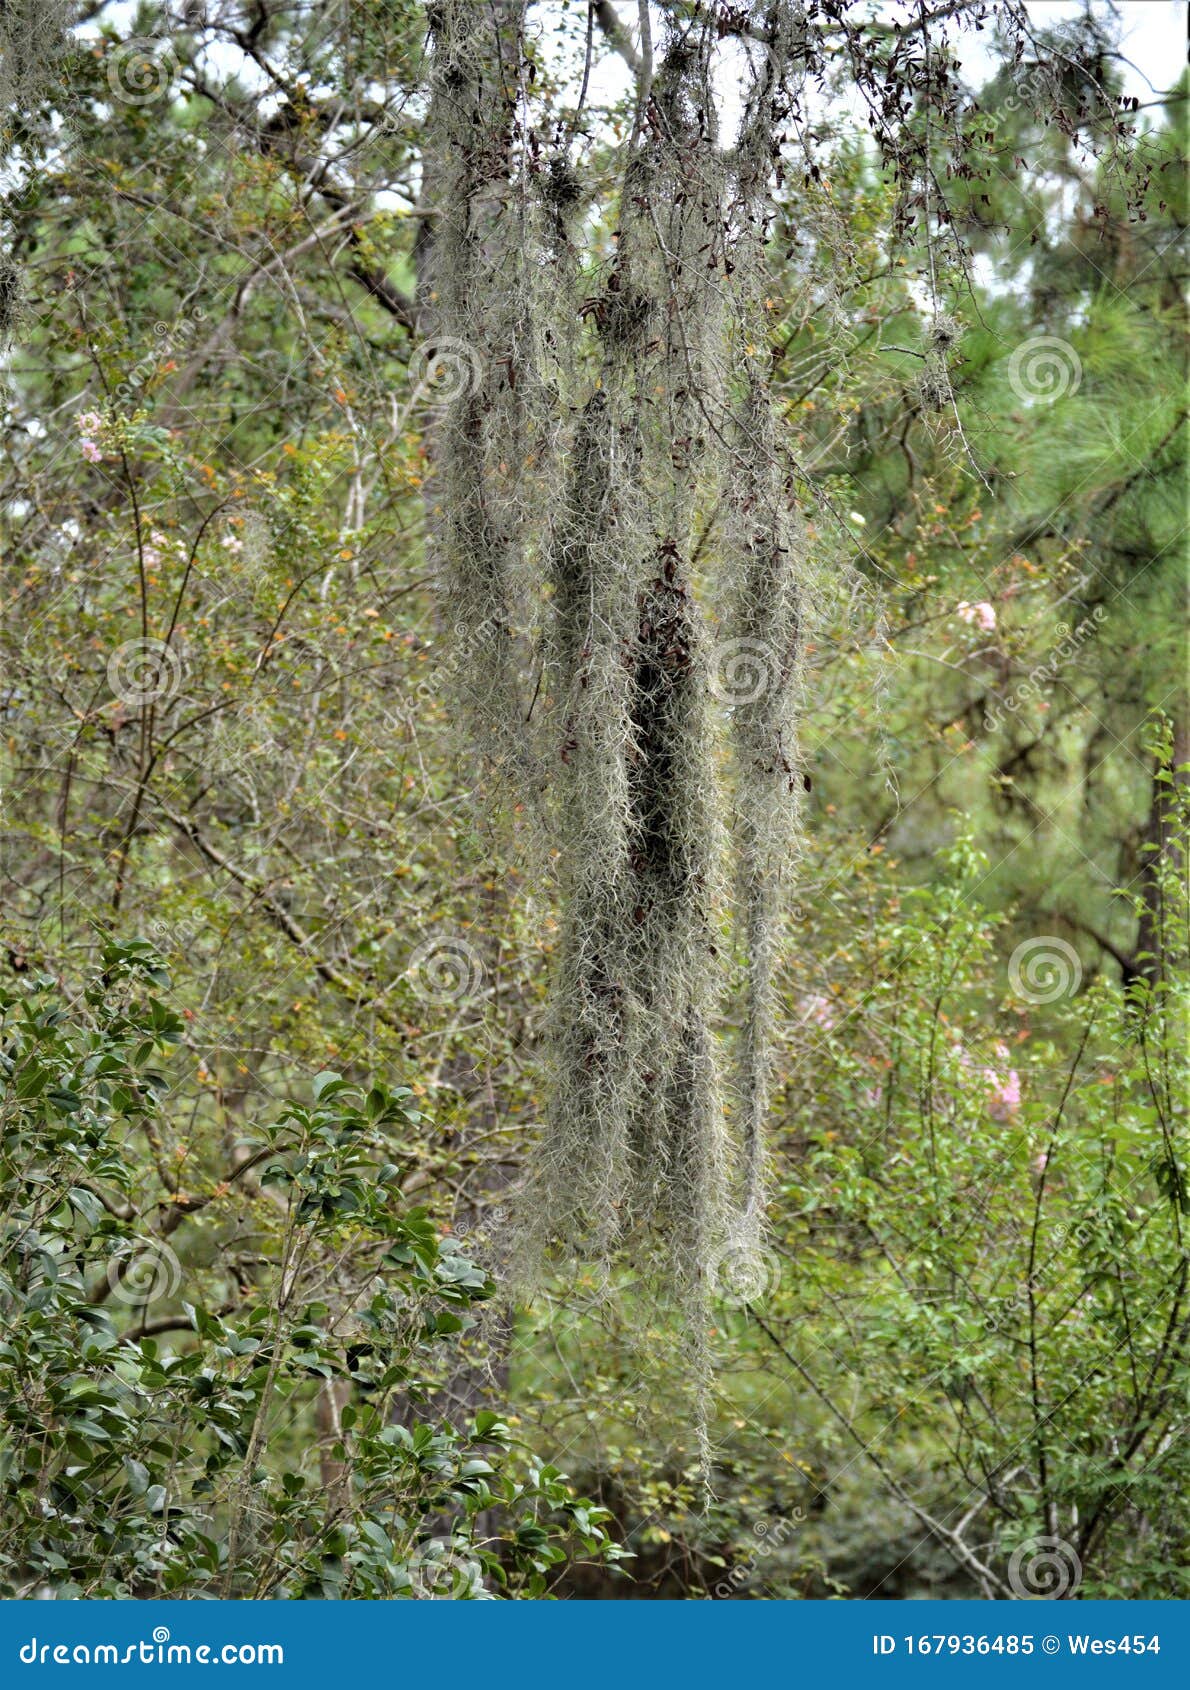 Long Strands of Moss Hanging from the Tree Stock Image - Image of